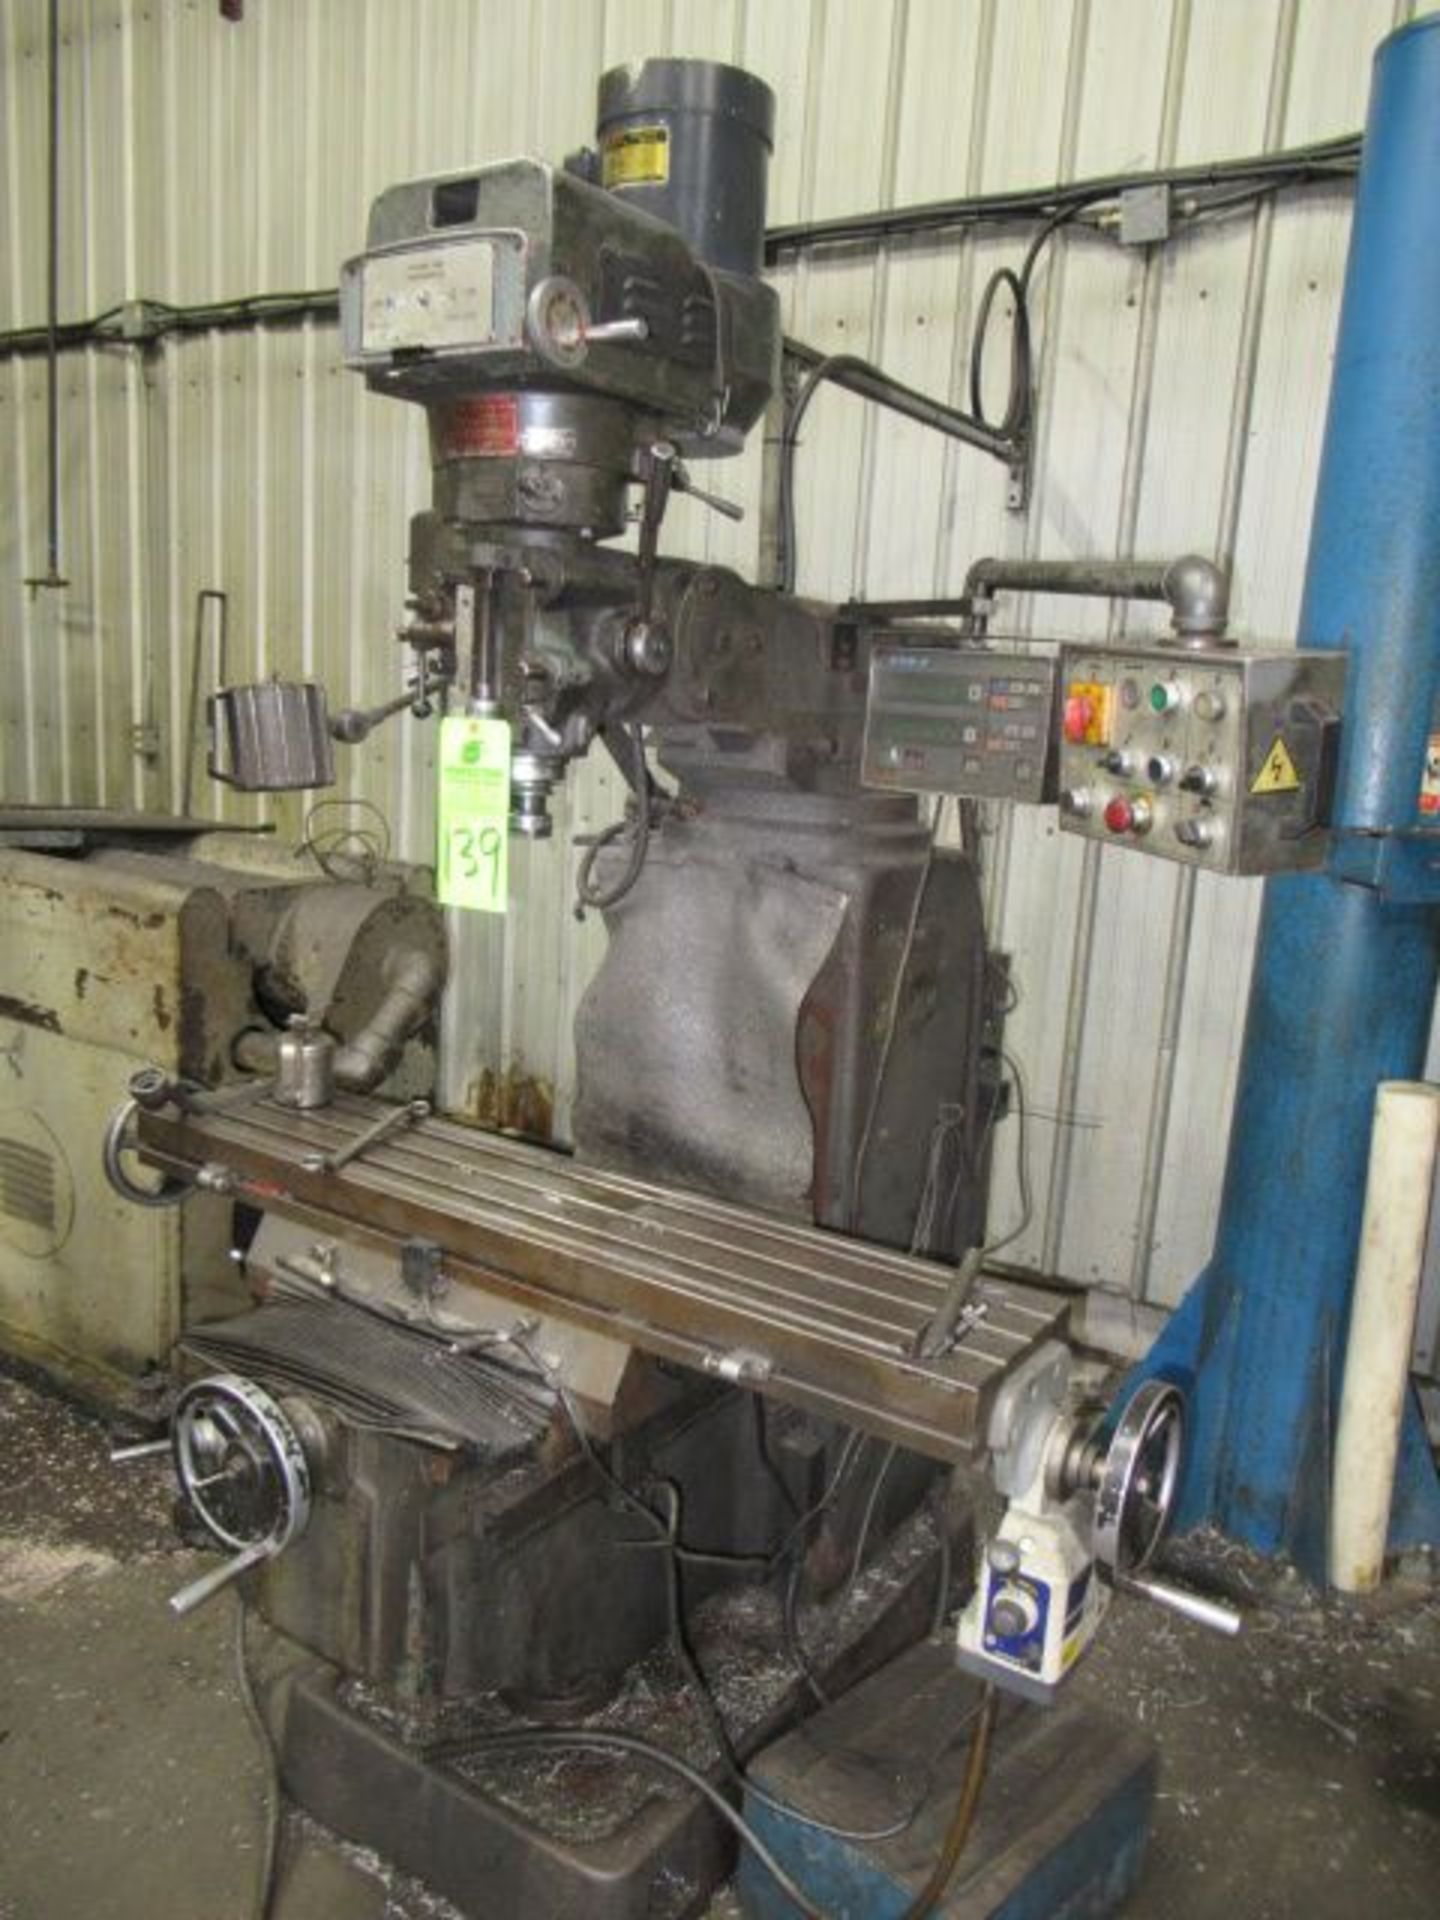 EAST LION 5 hp Vertical Mill, s/n 980203, w/ Power Feed Table ($900 Rigging Cost) - Image 2 of 3